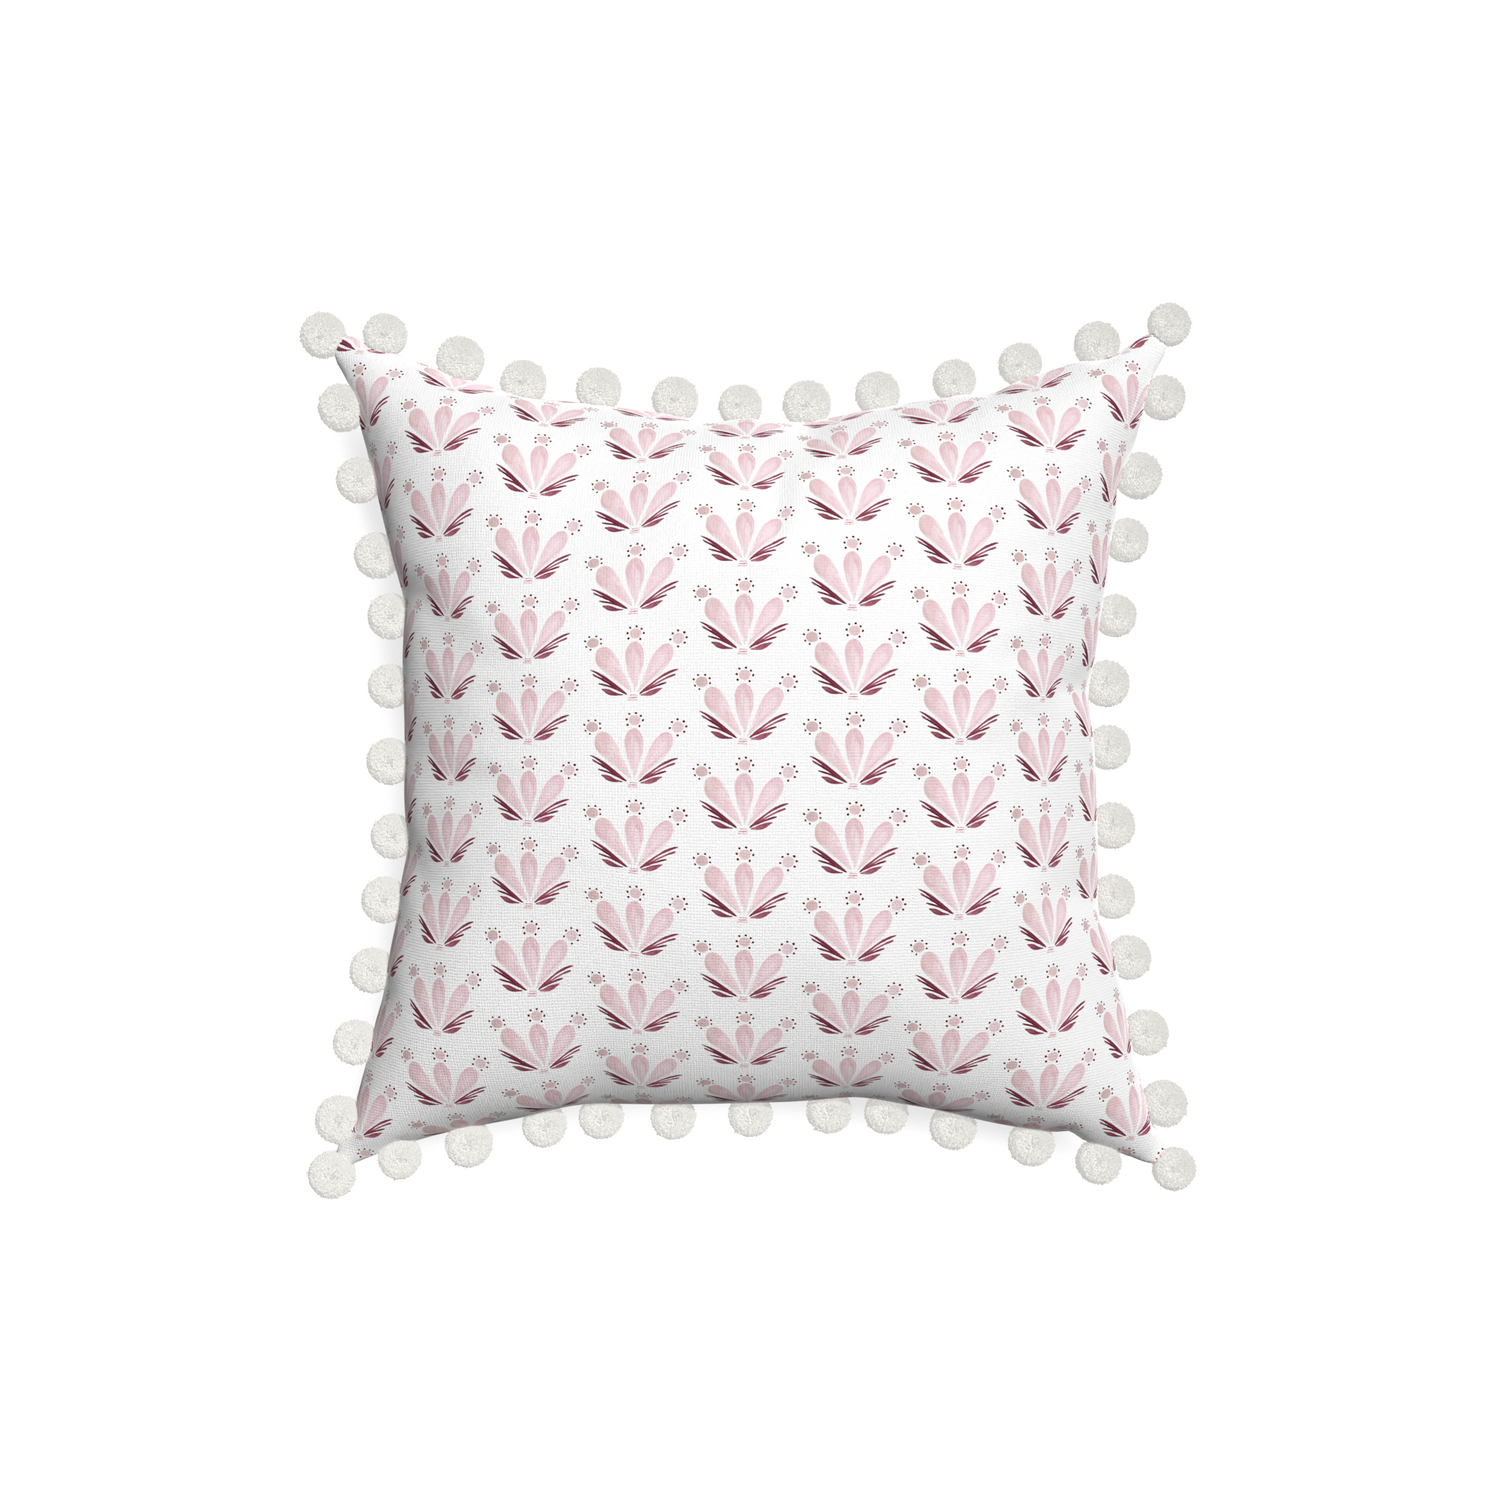 18-square serena pink custom pink & burgundy drop repeat floralpillow with snow pom pom on white background